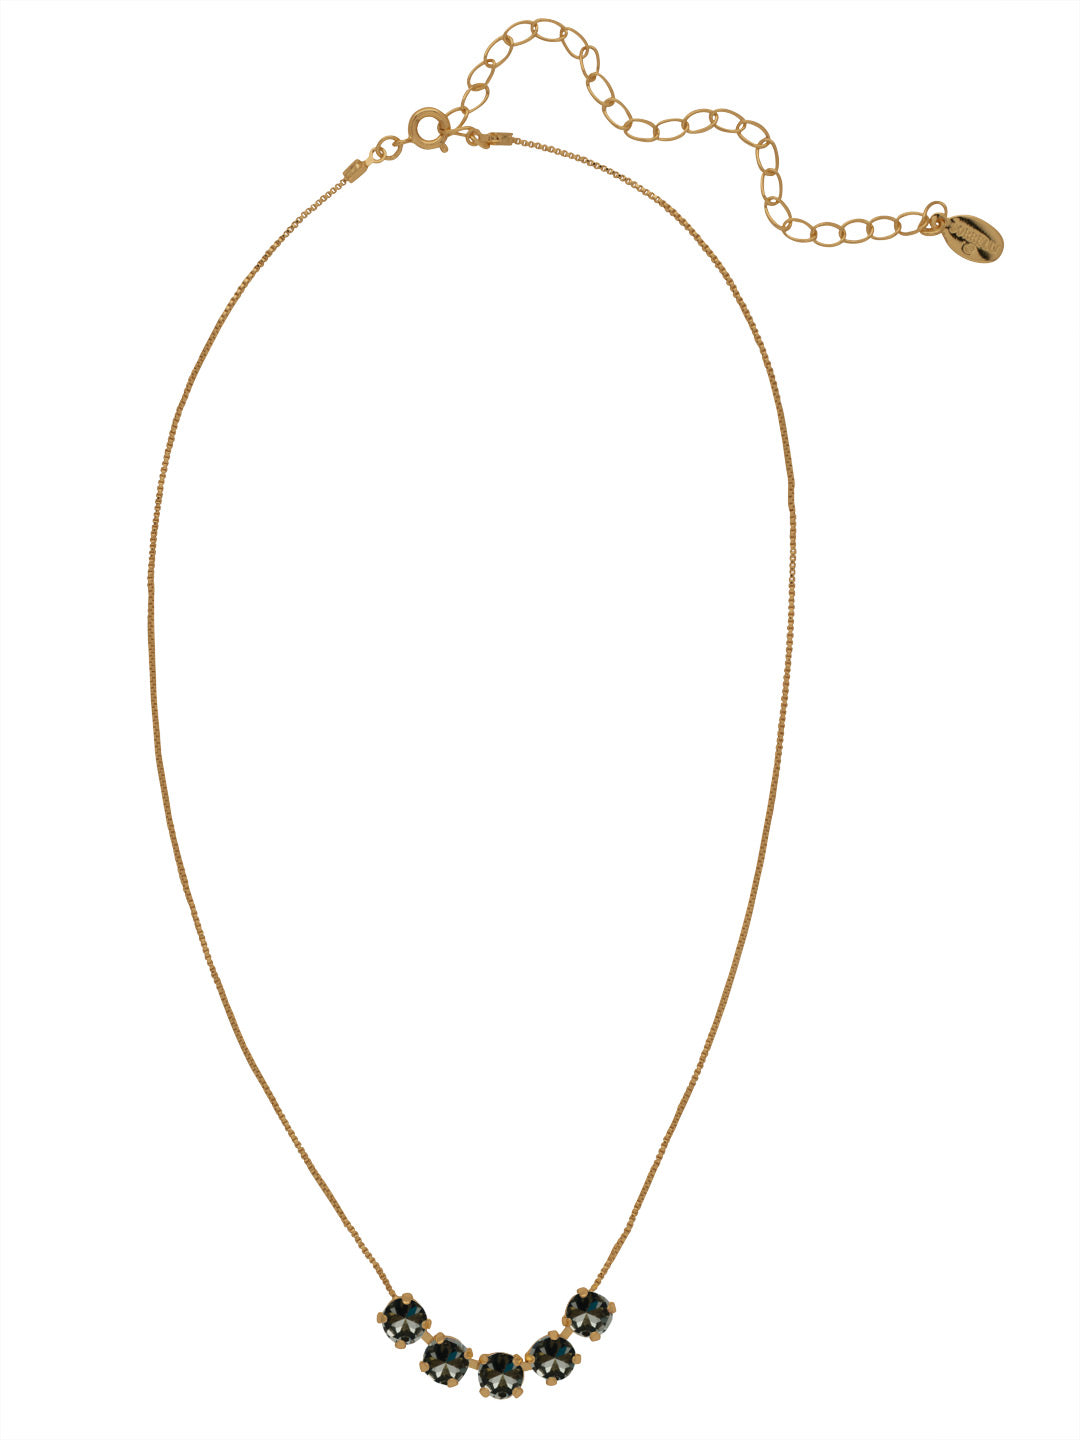 Shaughna Tennis Necklace - NFC84AGBD - <p>The Shaughna Tennis Necklace features five crystals on a delicate adjustable chain. From Sorrelli's Black Diamond collection in our Antique Gold-tone finish.</p>